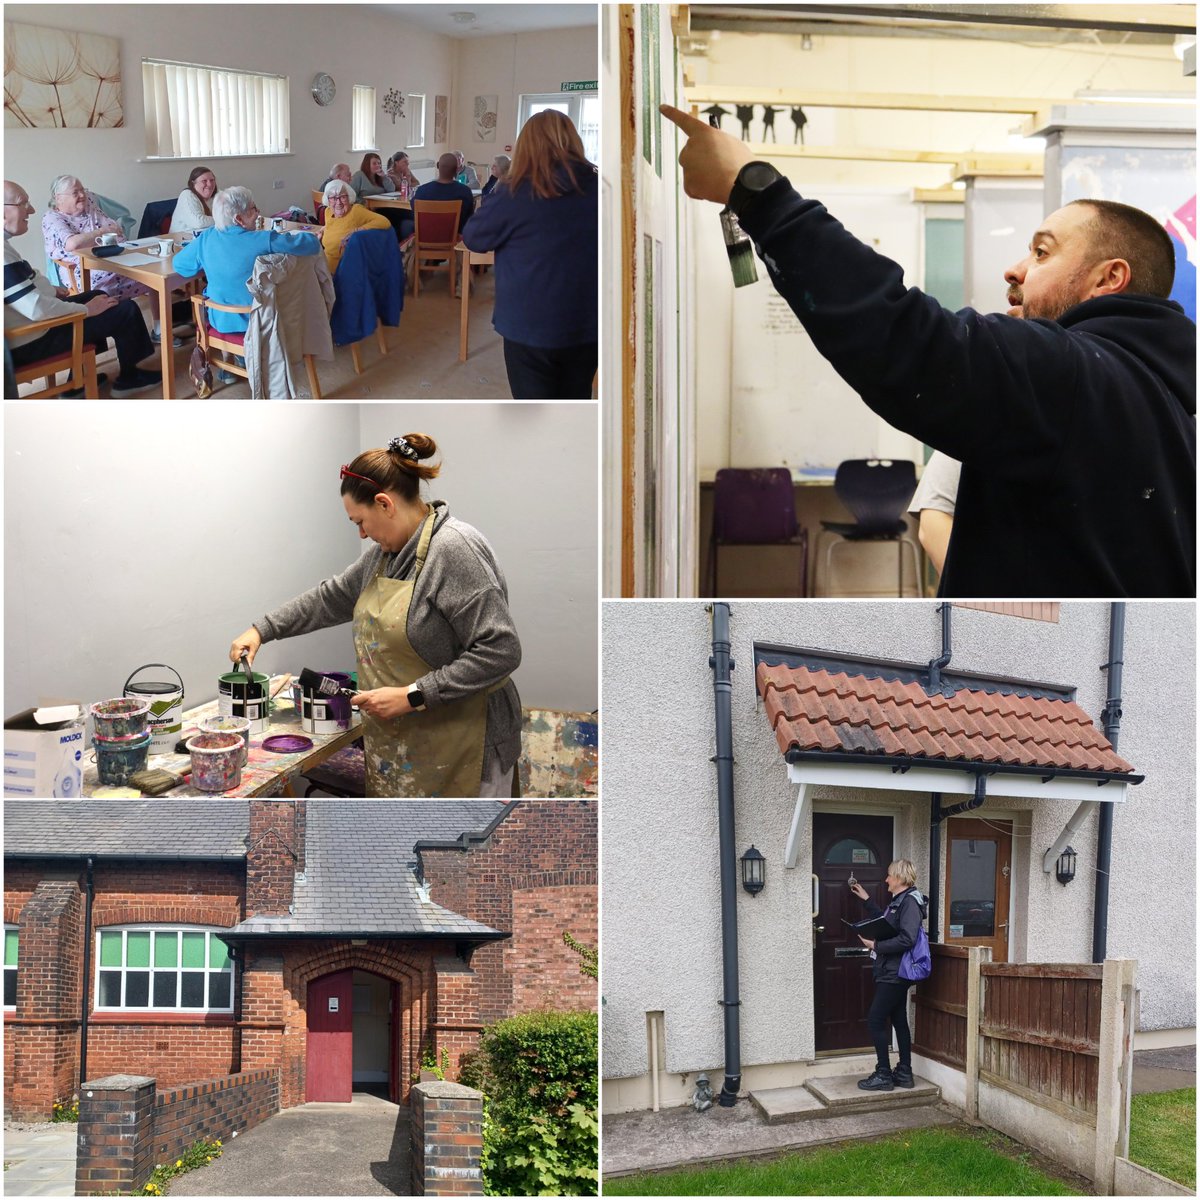 This week we've been helping tenants learn new skills and make new friends, as well as getting out into our communities offering involvement opportunities, support and advice #getinvolved #communityengagement